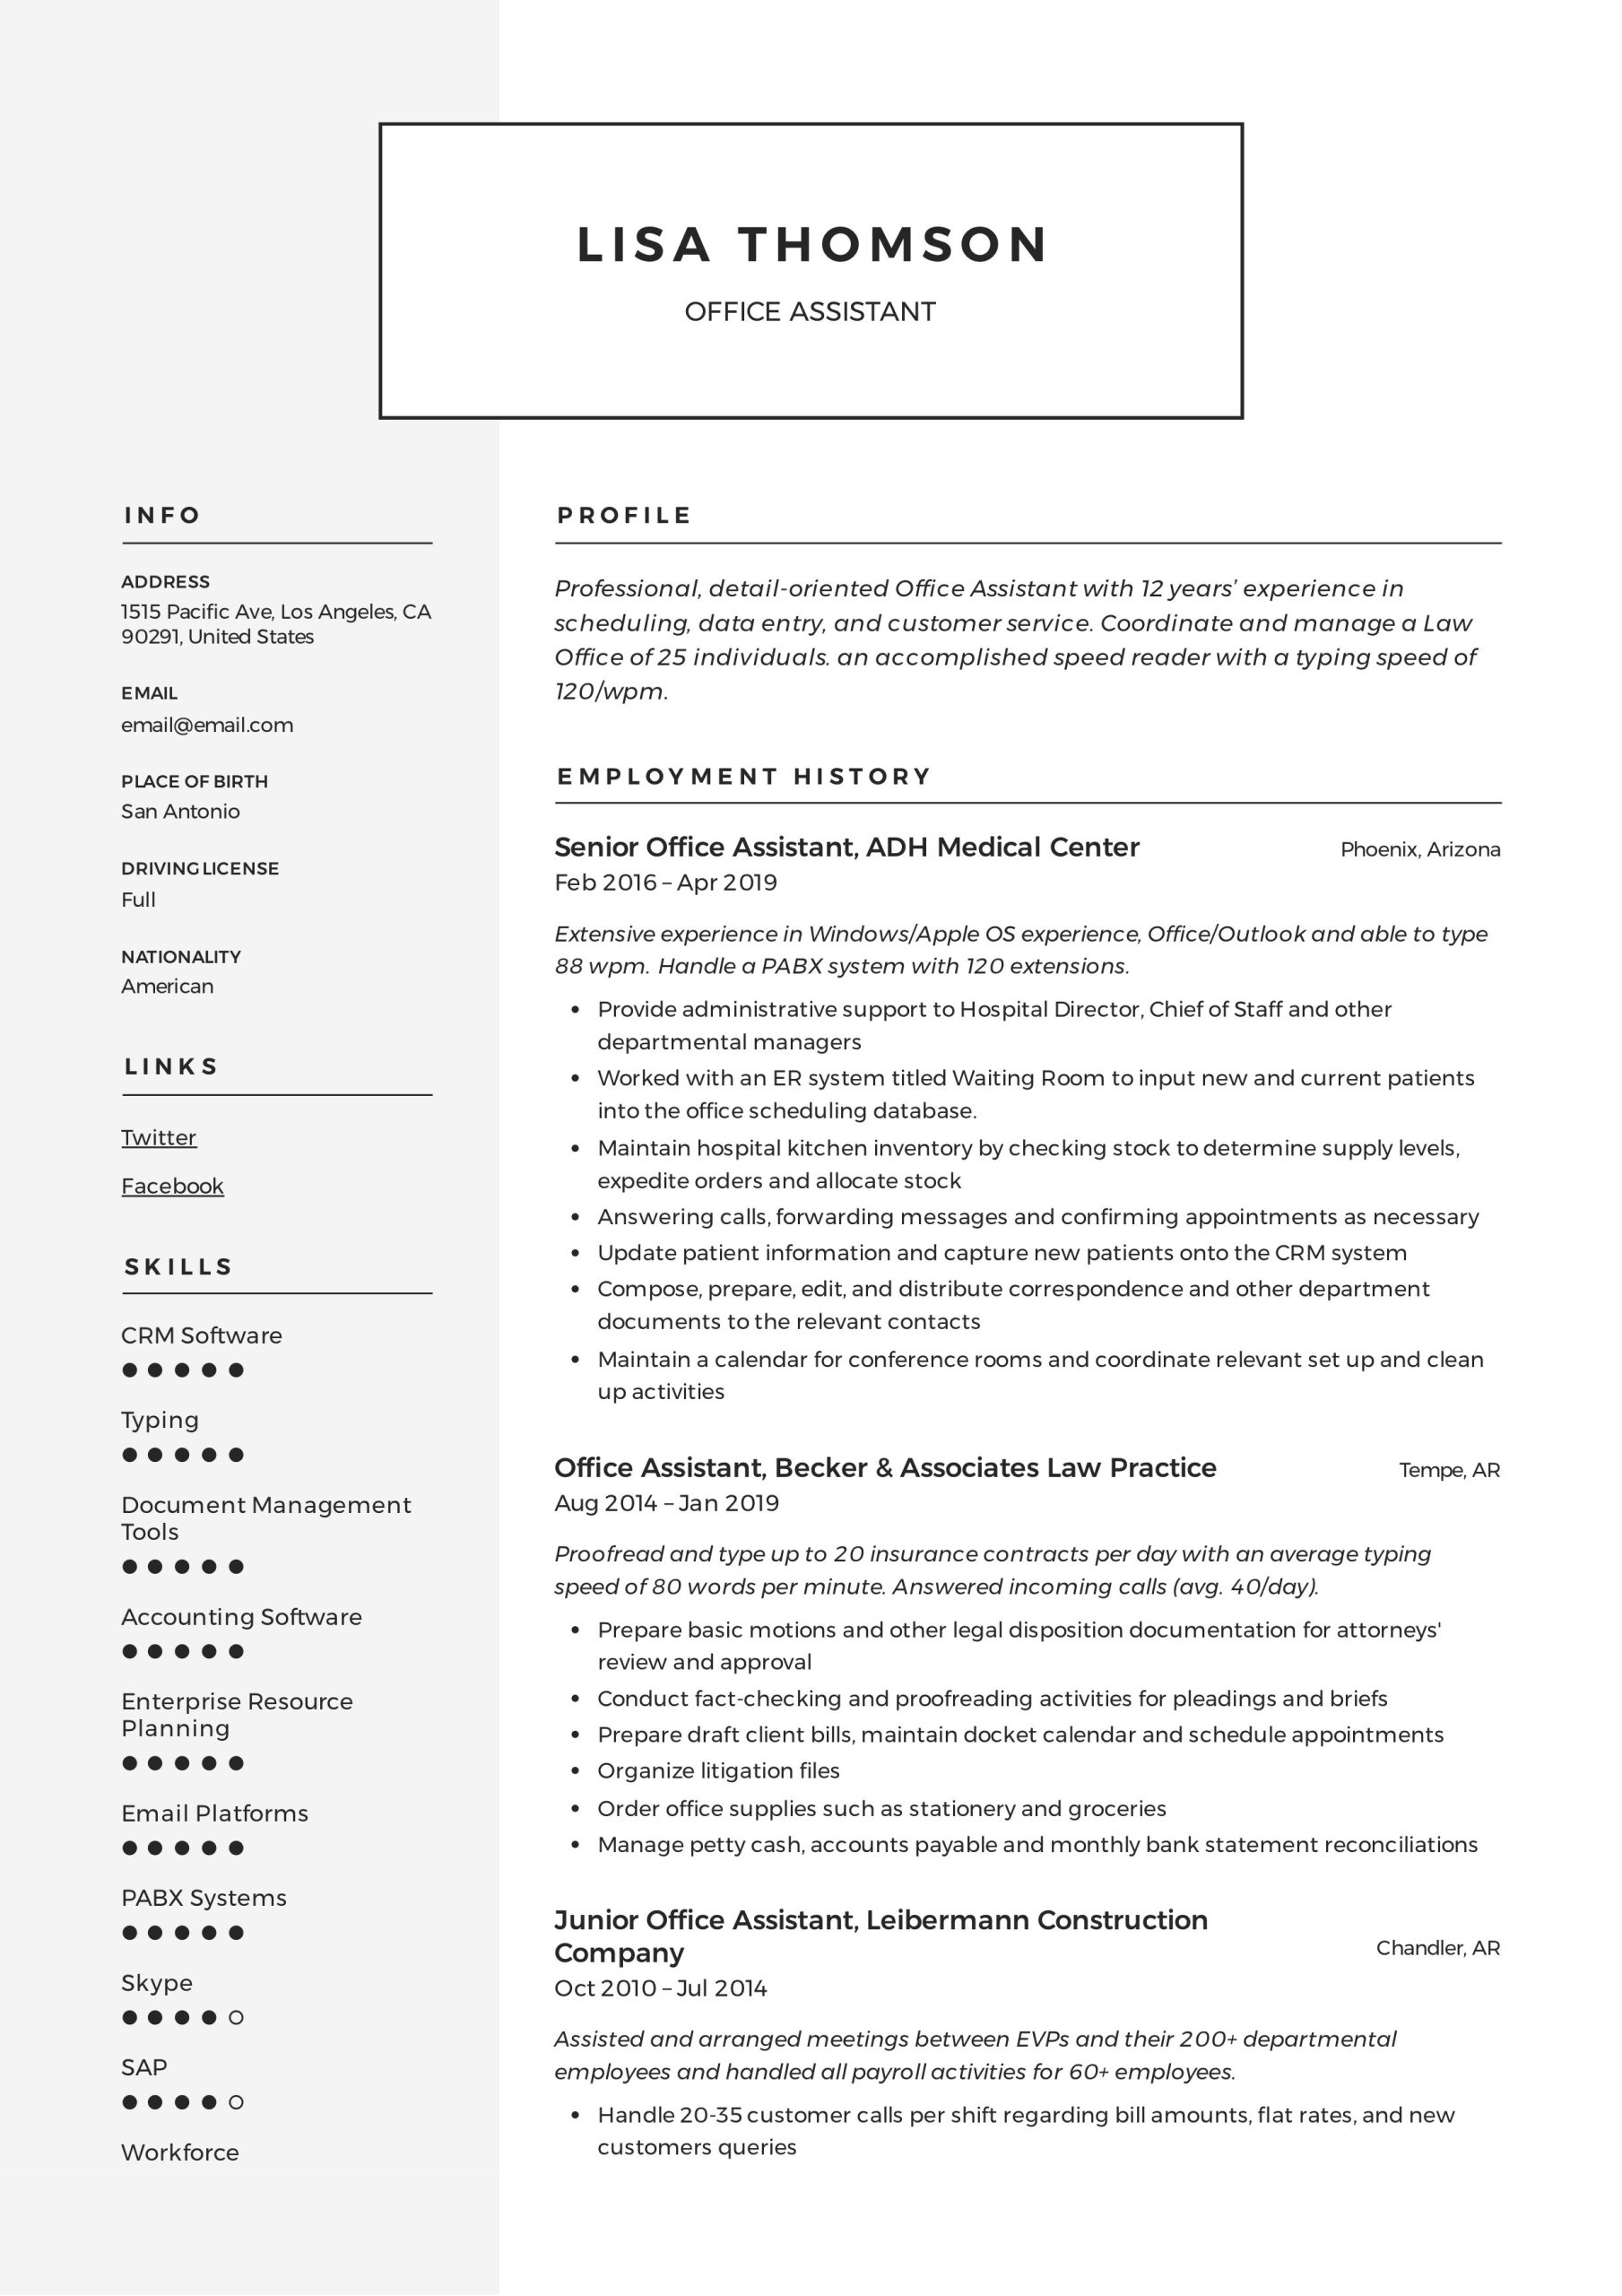 Sample Resume for Construction Company Office assistant Office assistant Resume   Writing Guide 12 Resume Templates 2020